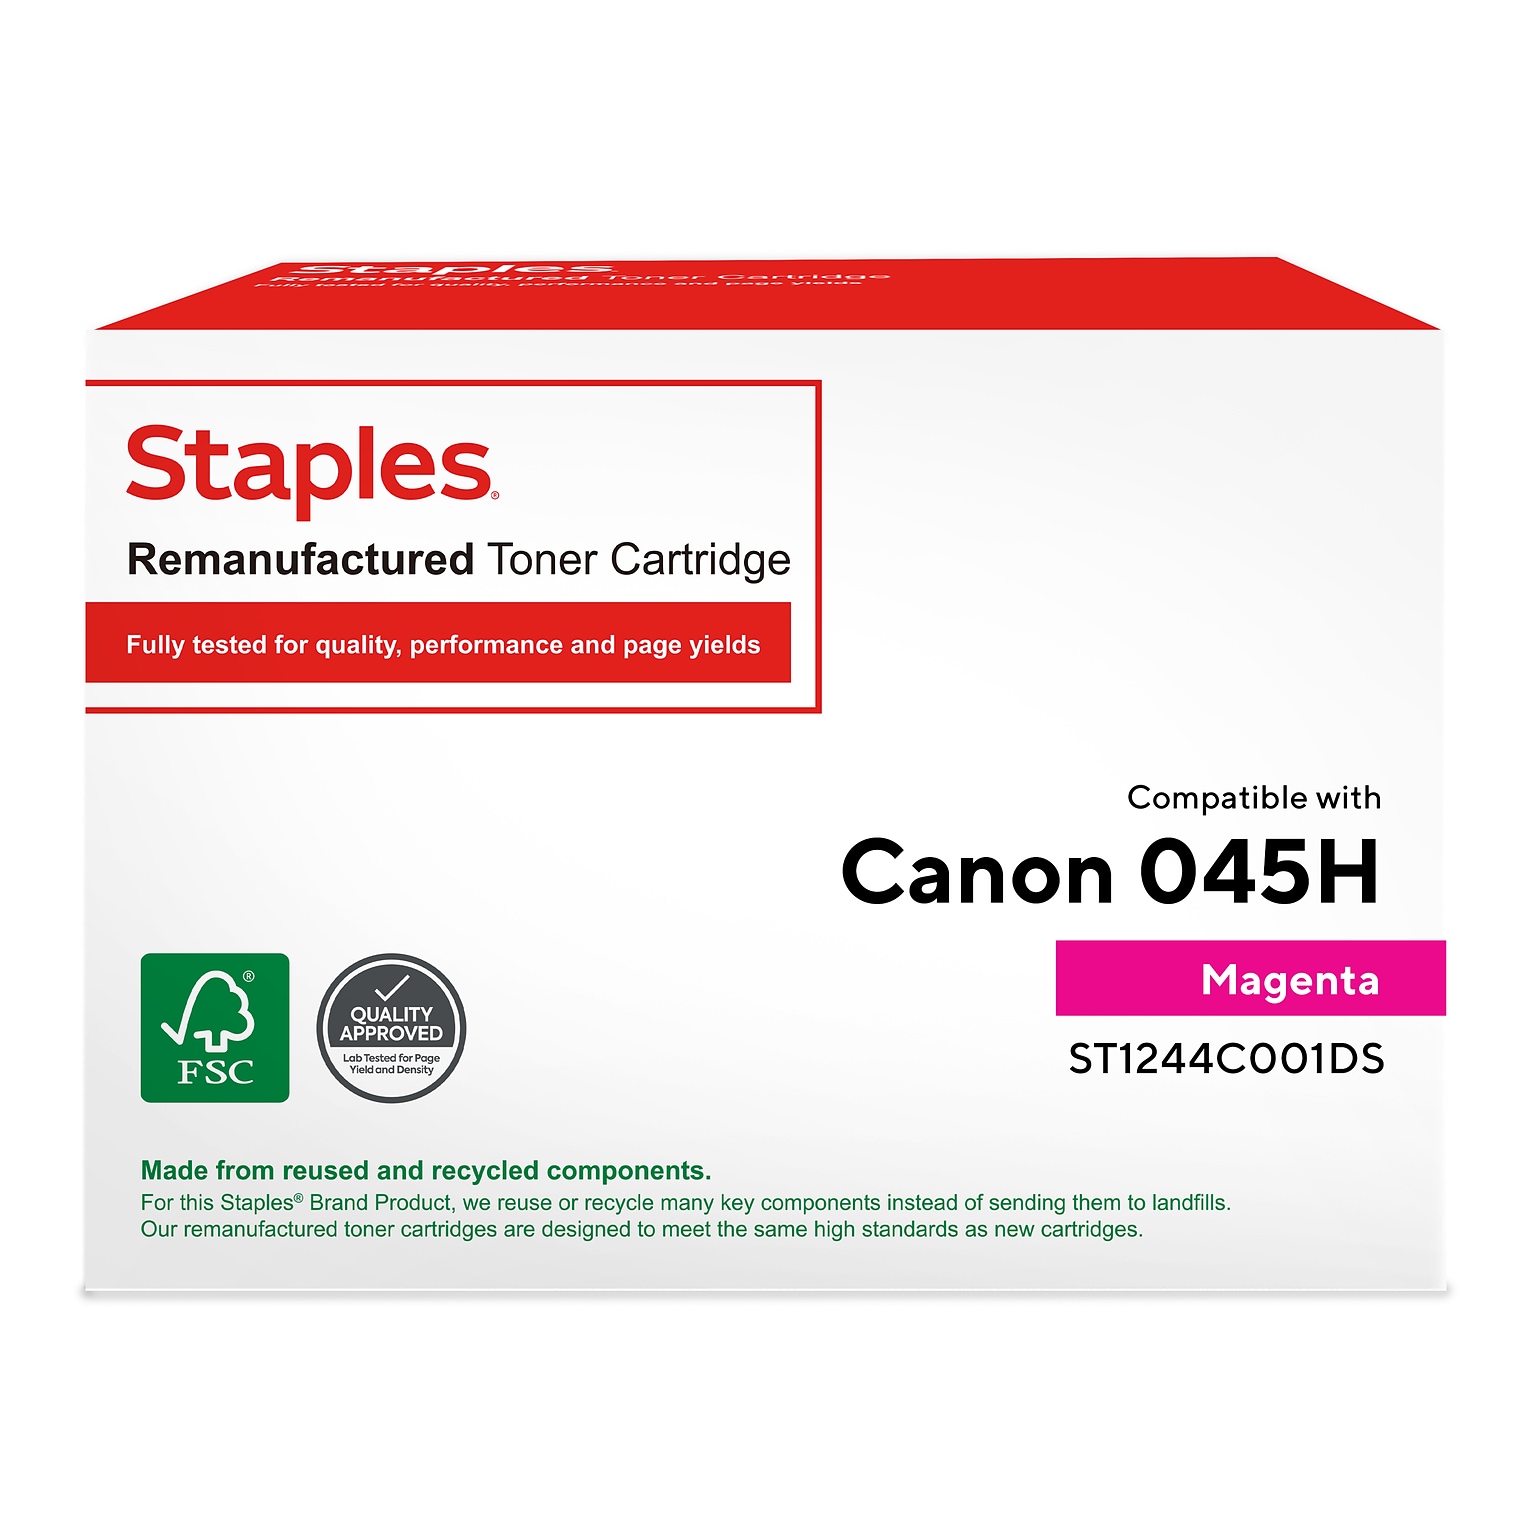 Staples Remanufactured Magenta High Yield Toner Cartridge Replacement for Canon 045H (TR1244C001DS/ST1244C001DS)